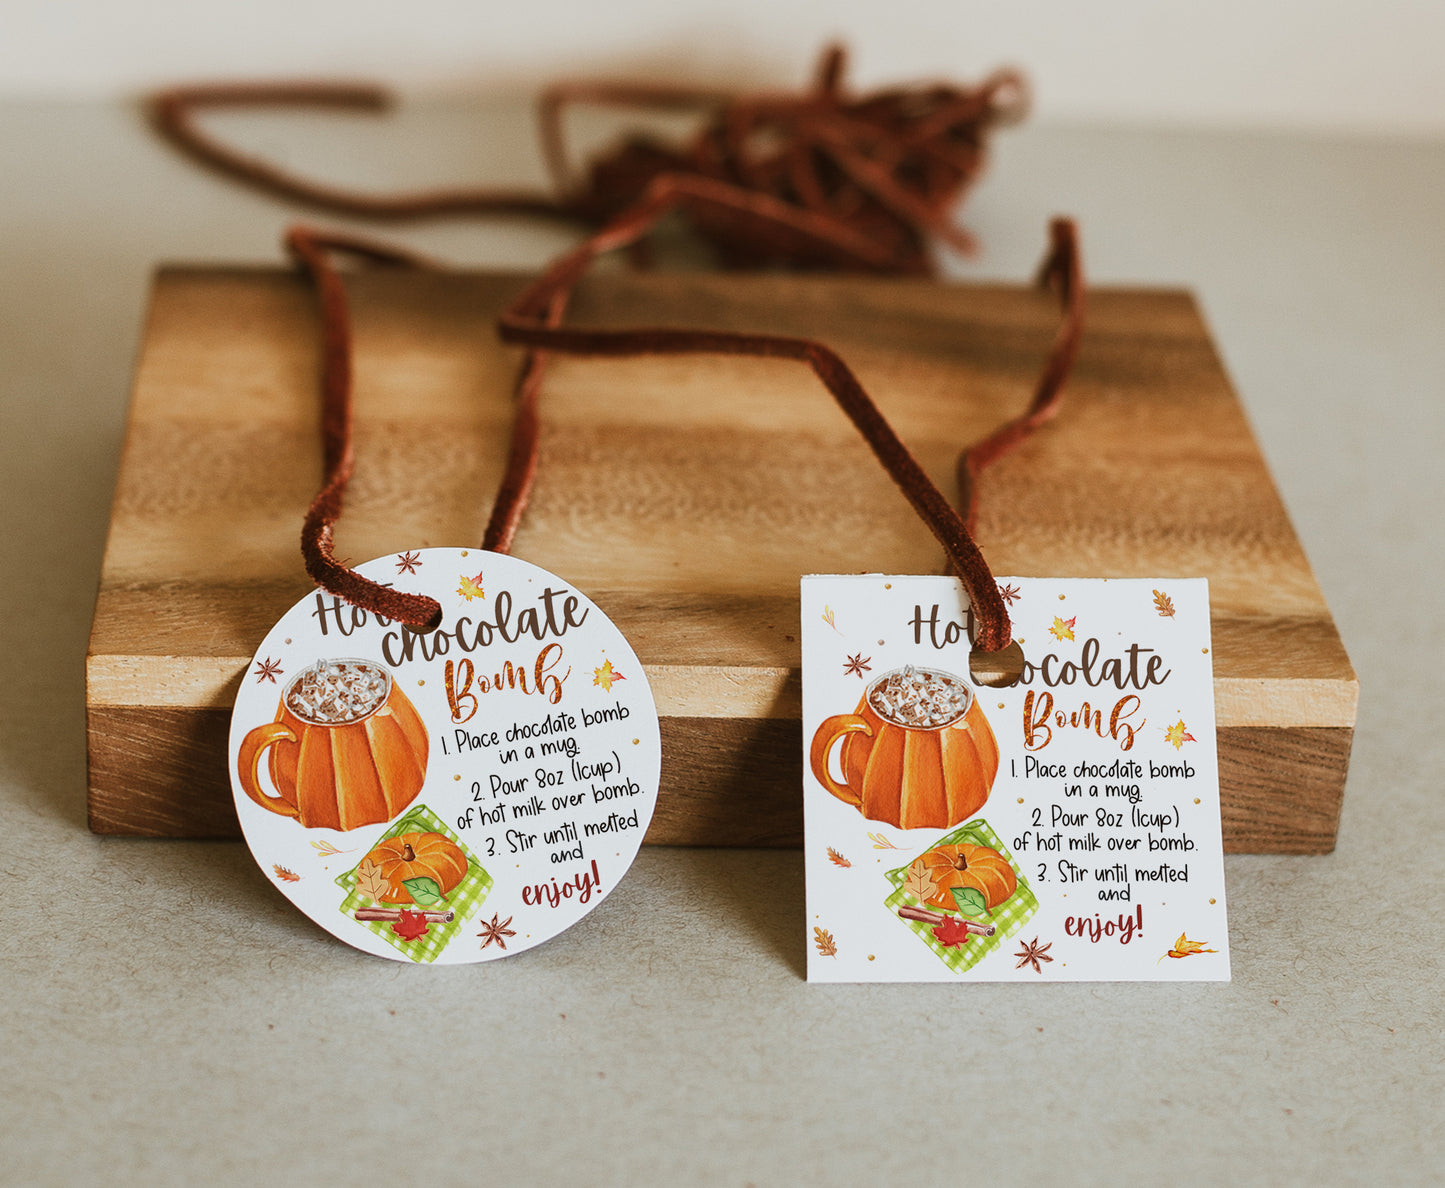 Hot Chocolate Bomb Instructions Tags, Pumpkin Gift Tags